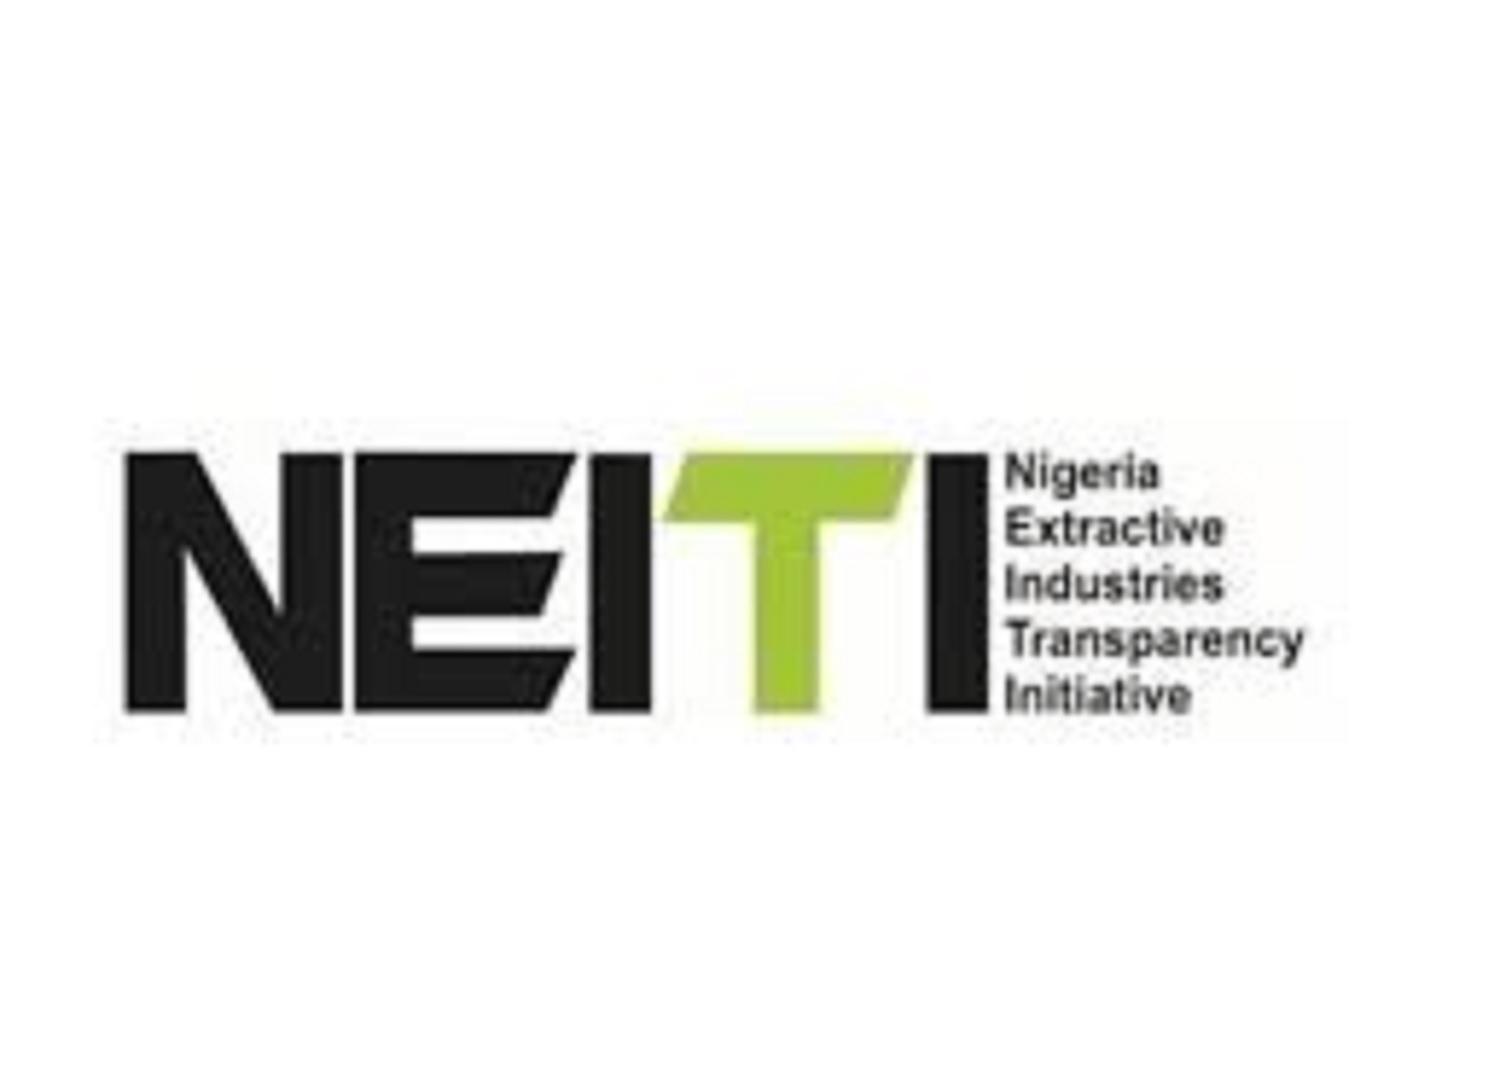 FG inaugurates NEITI Board, charges them to maintain standards